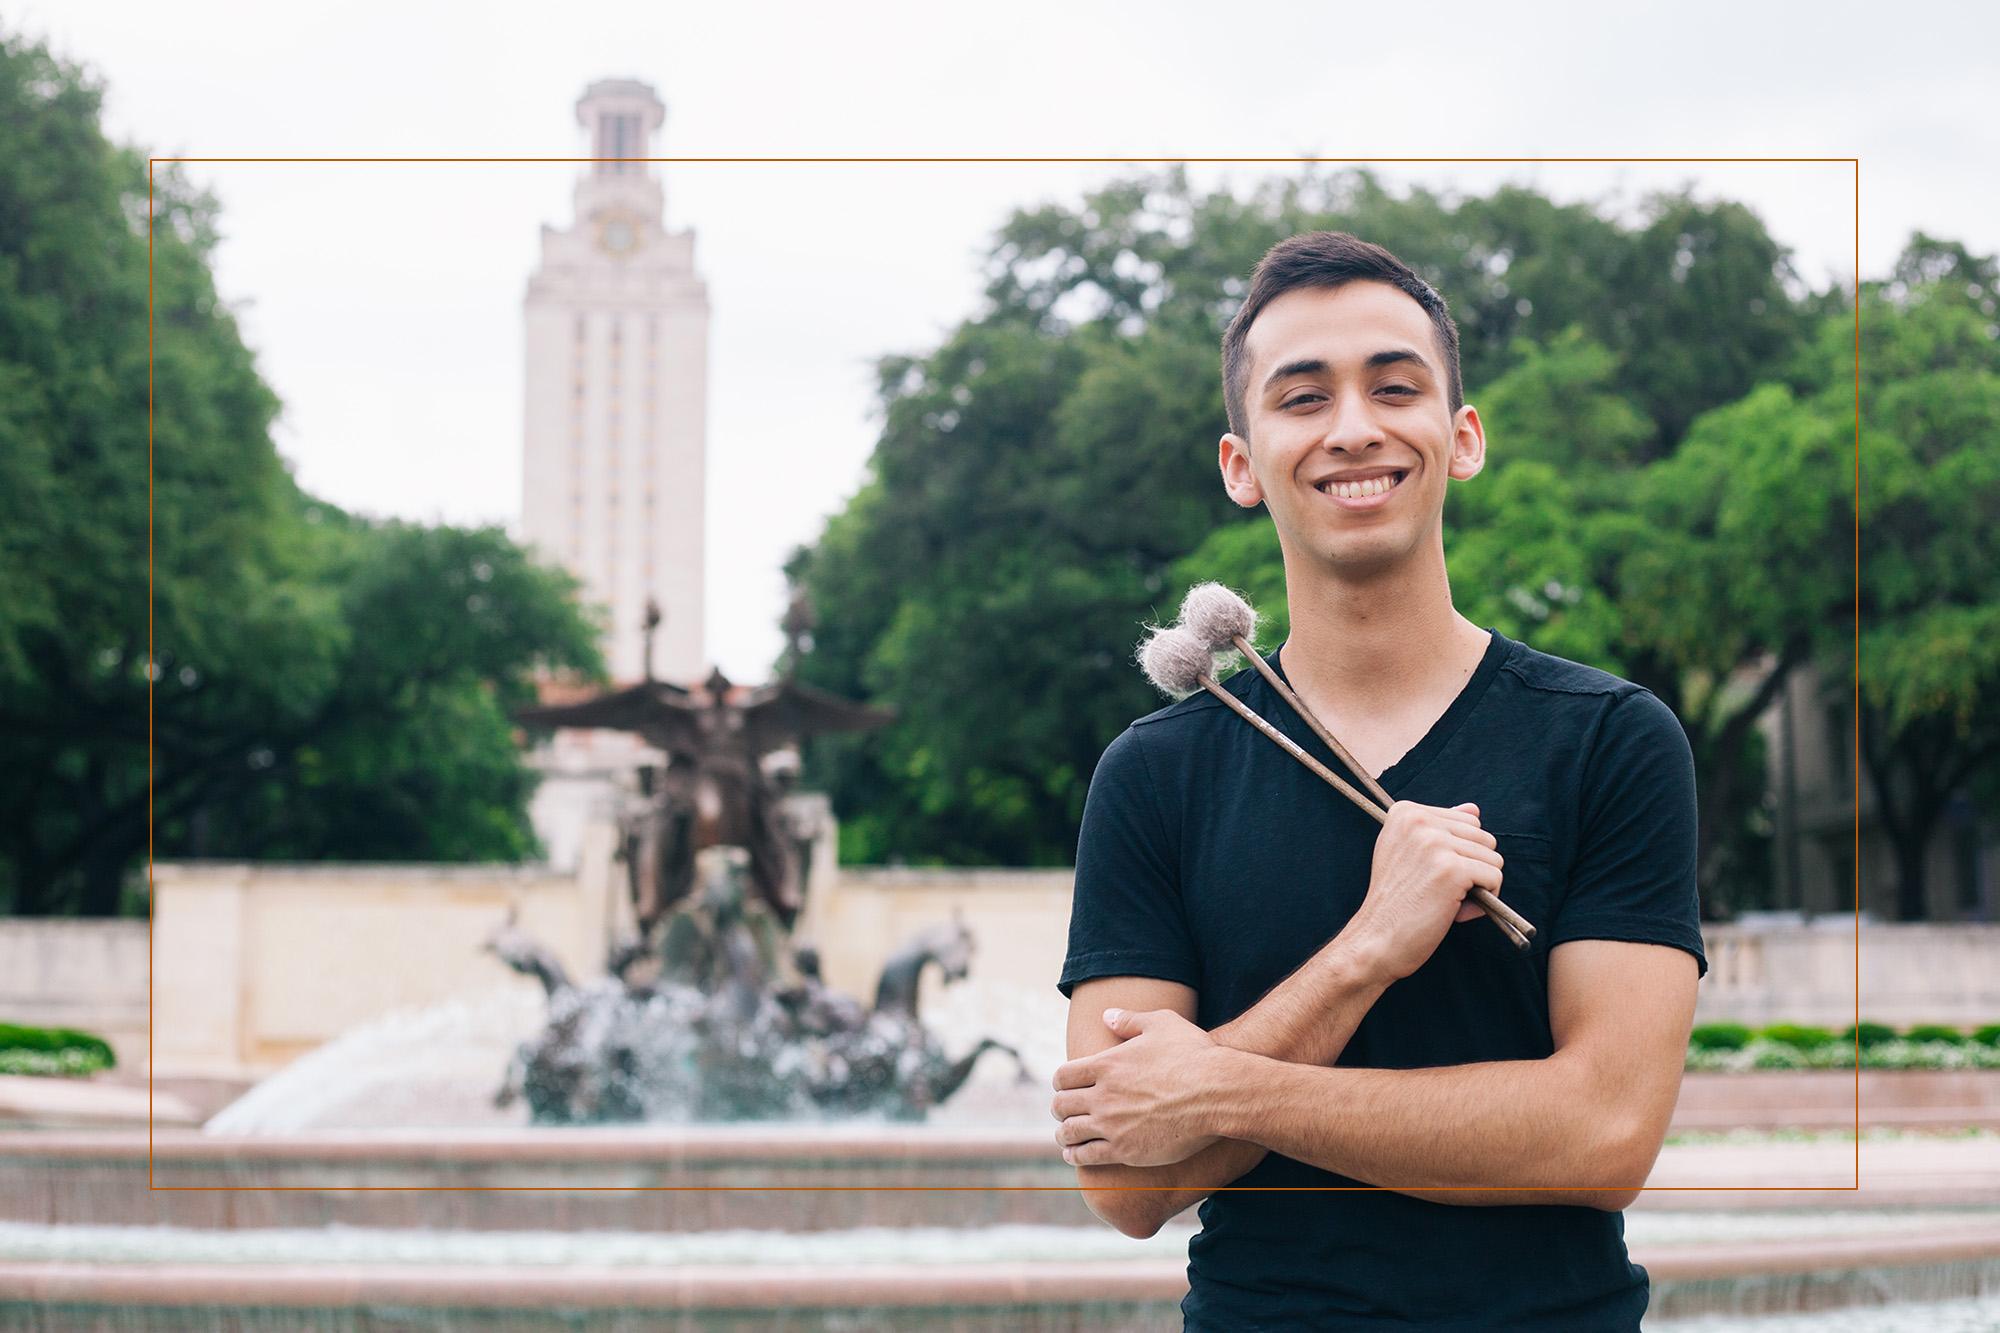 Male student with percussion mallets smiles at camera in front of the UT tower.